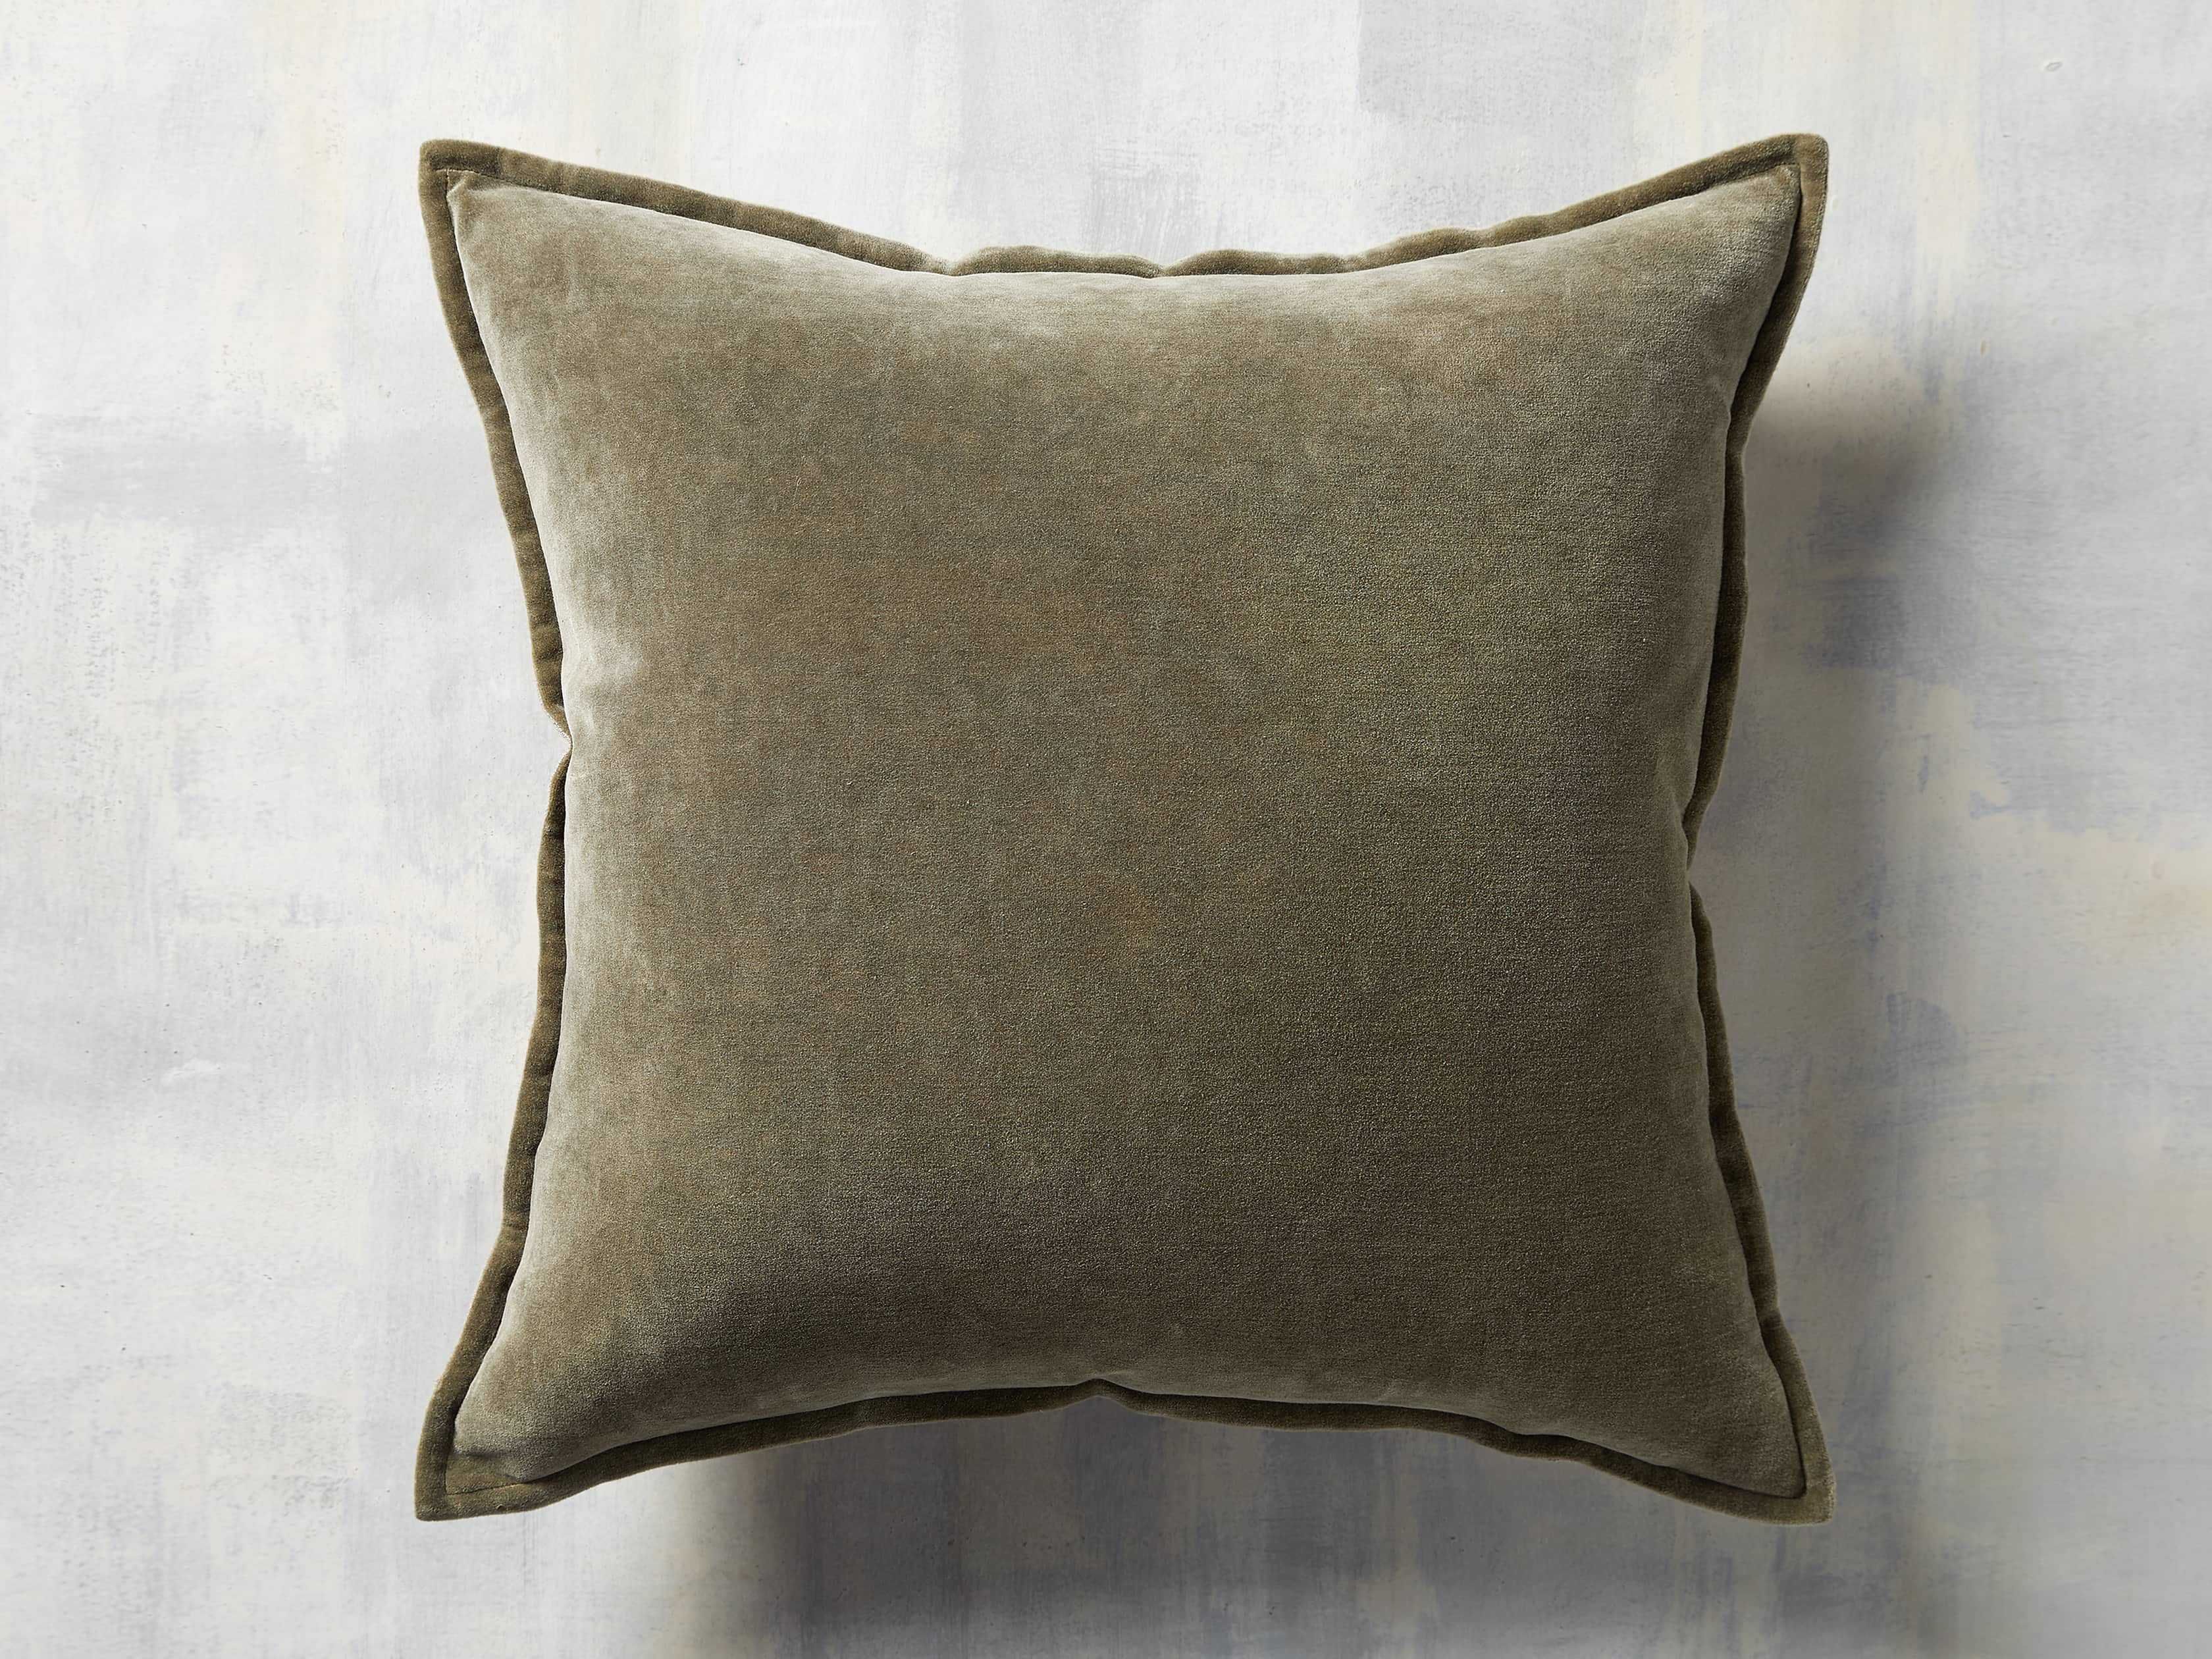 Stone Washed Velvet Square Pillow Cover | Arhaus